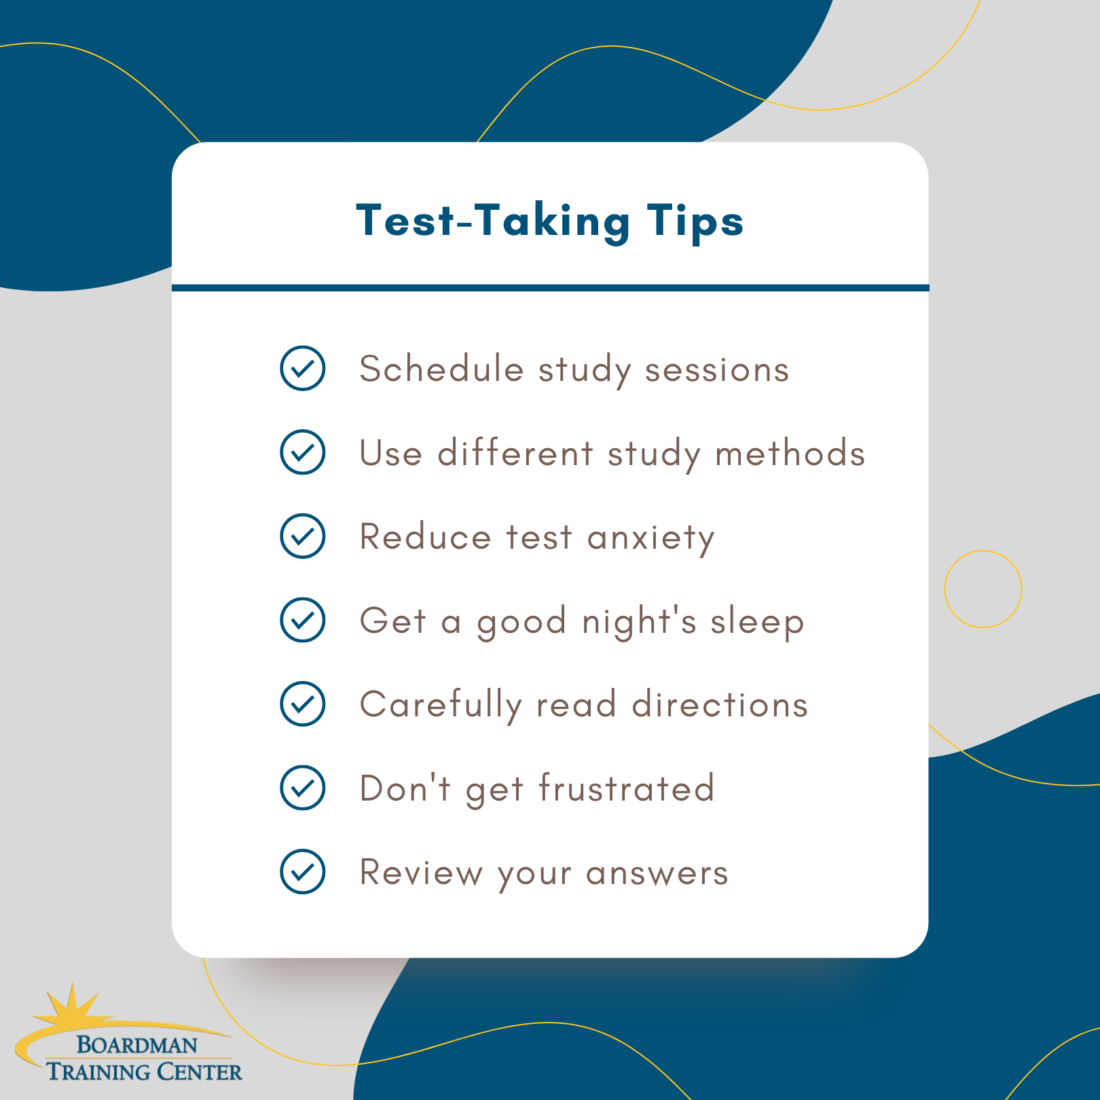 20 Test-Taking Tips for Your Next Exam